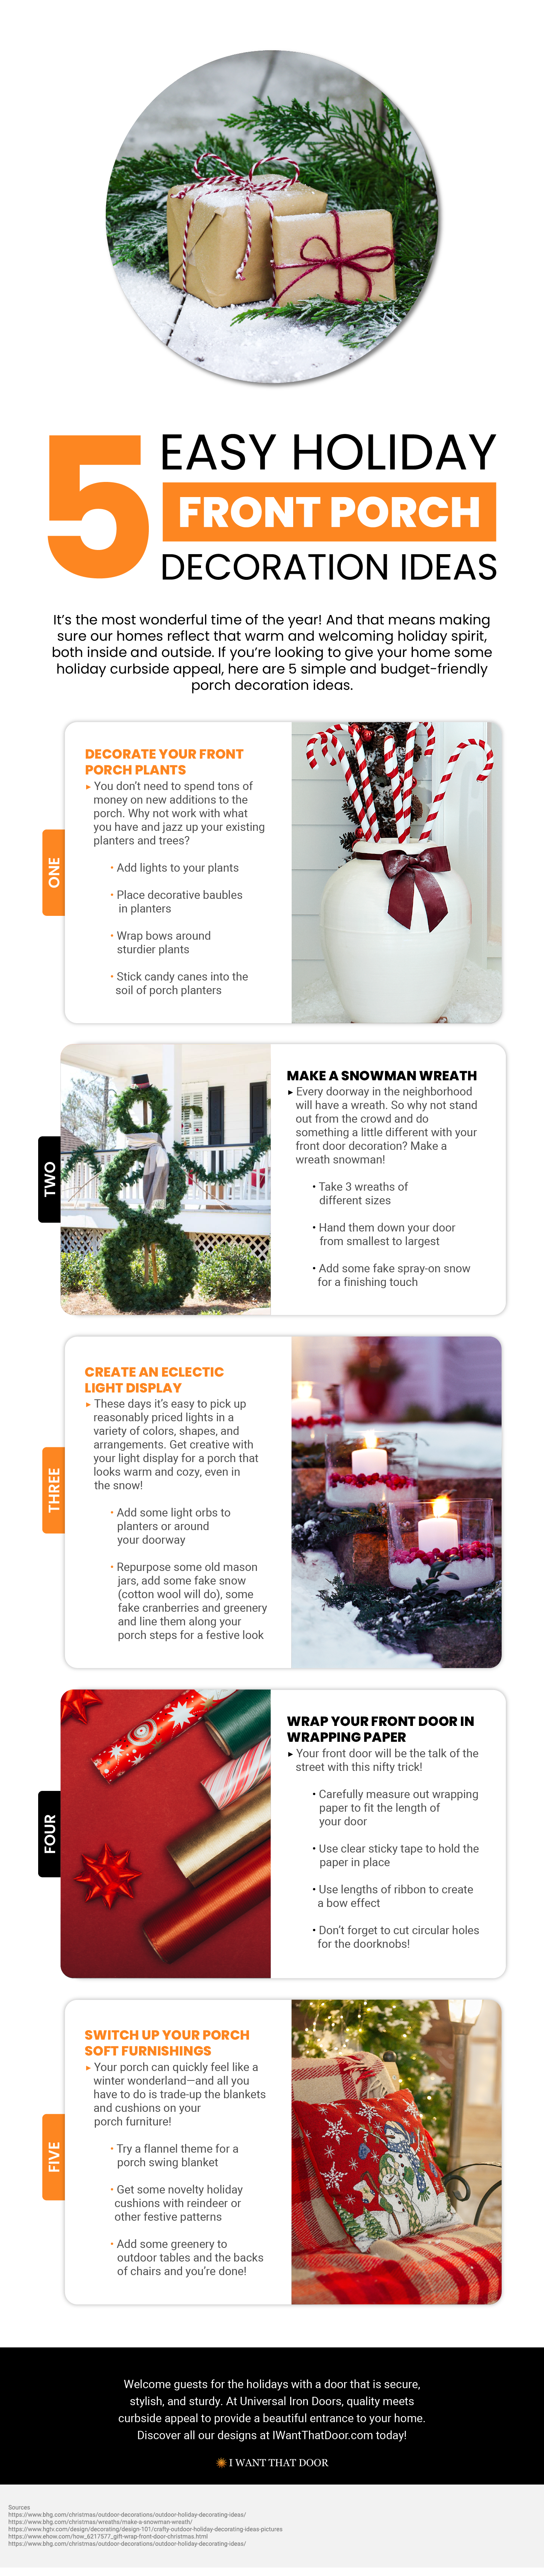 5 Easy Holiday Front Porch Decoration Ideas Infographic